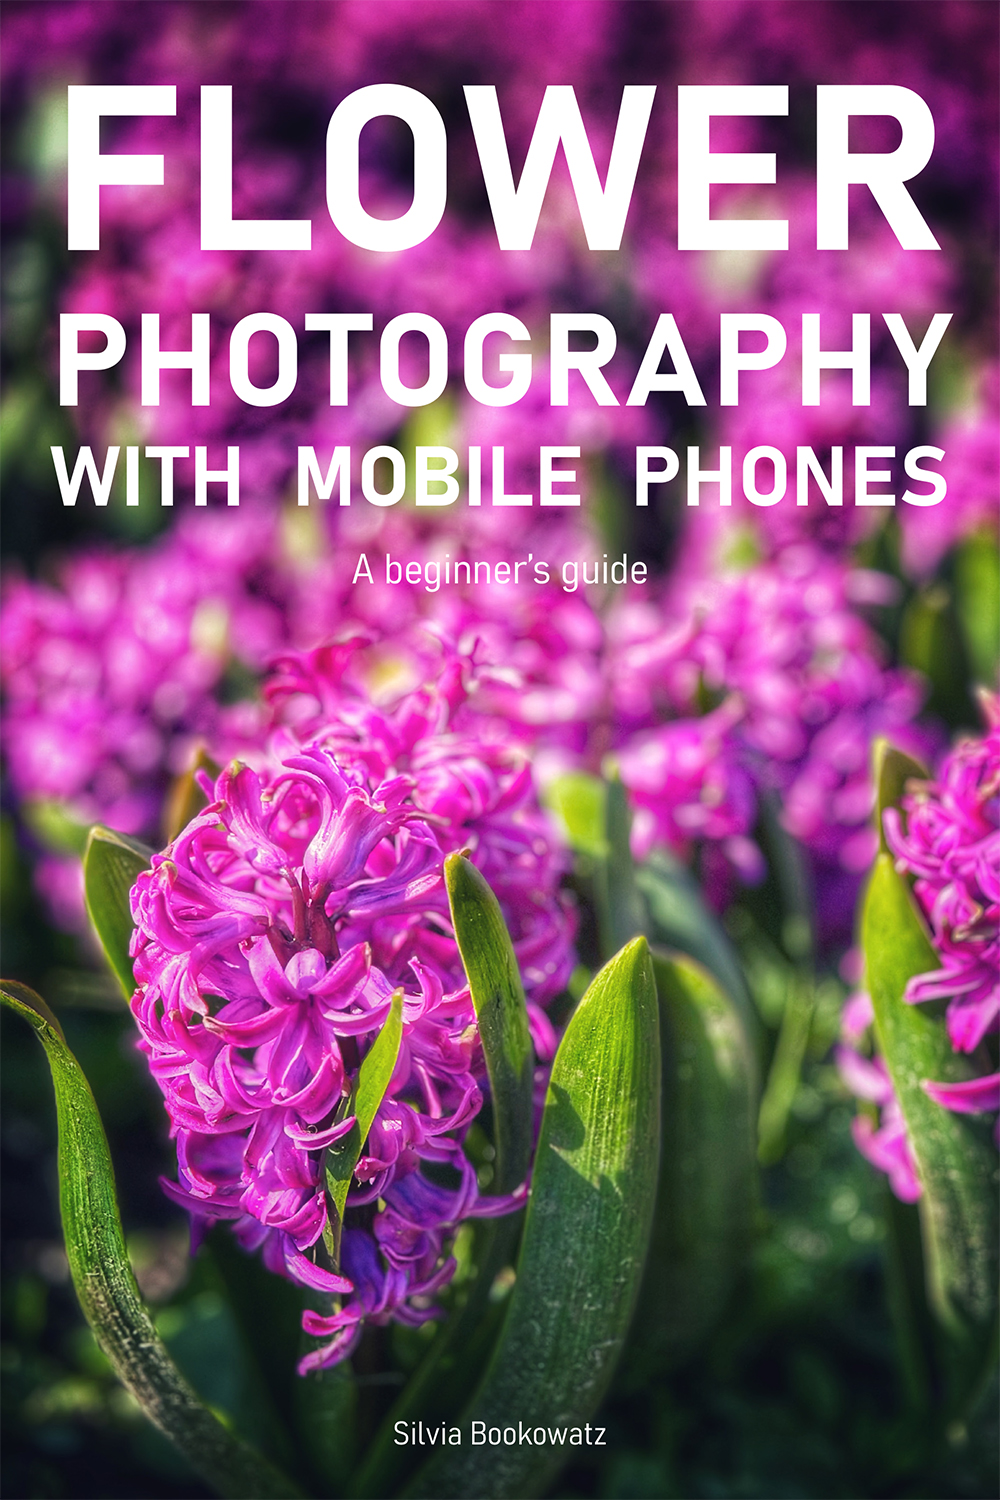 Flower Photography with Mobile Phones: A Beginner's Guide